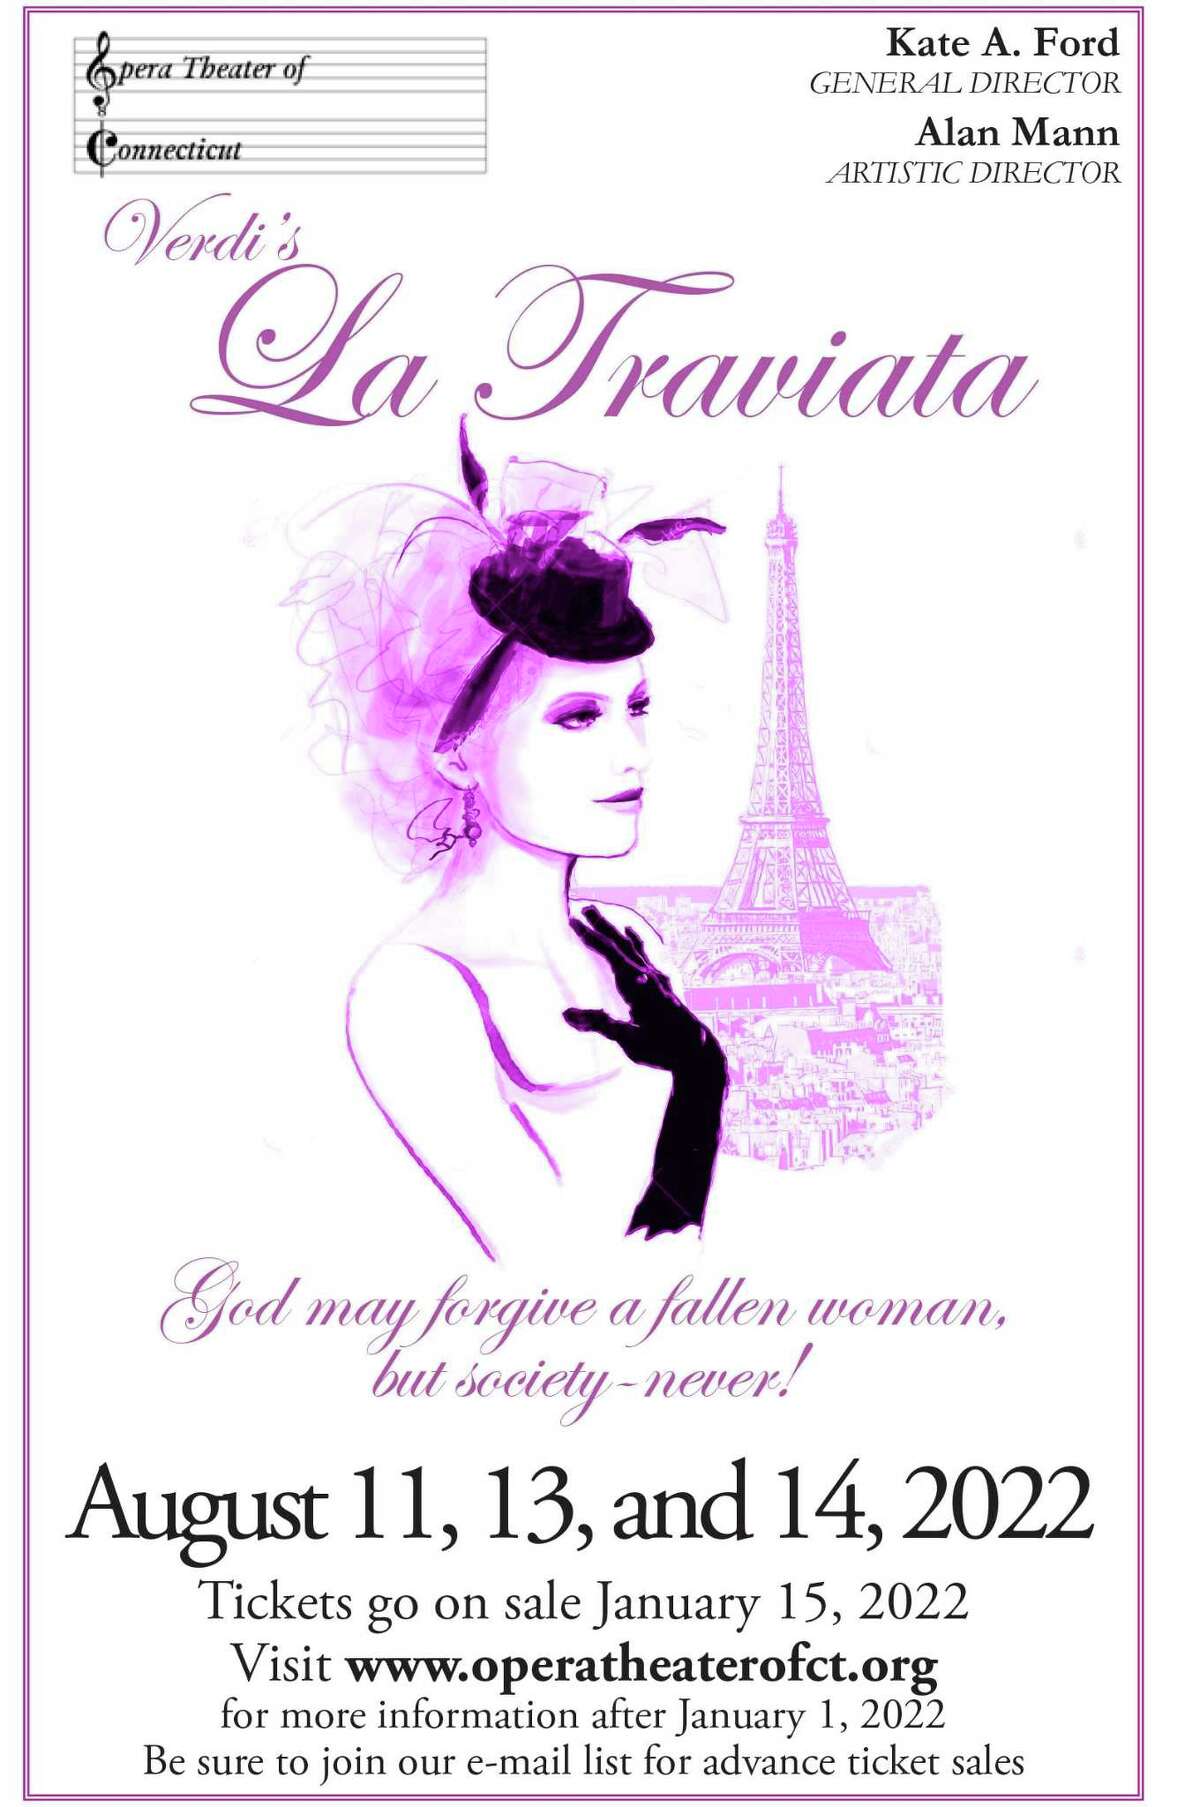 The Opera Theater of Connecticut will stage “La Traviata” this August.